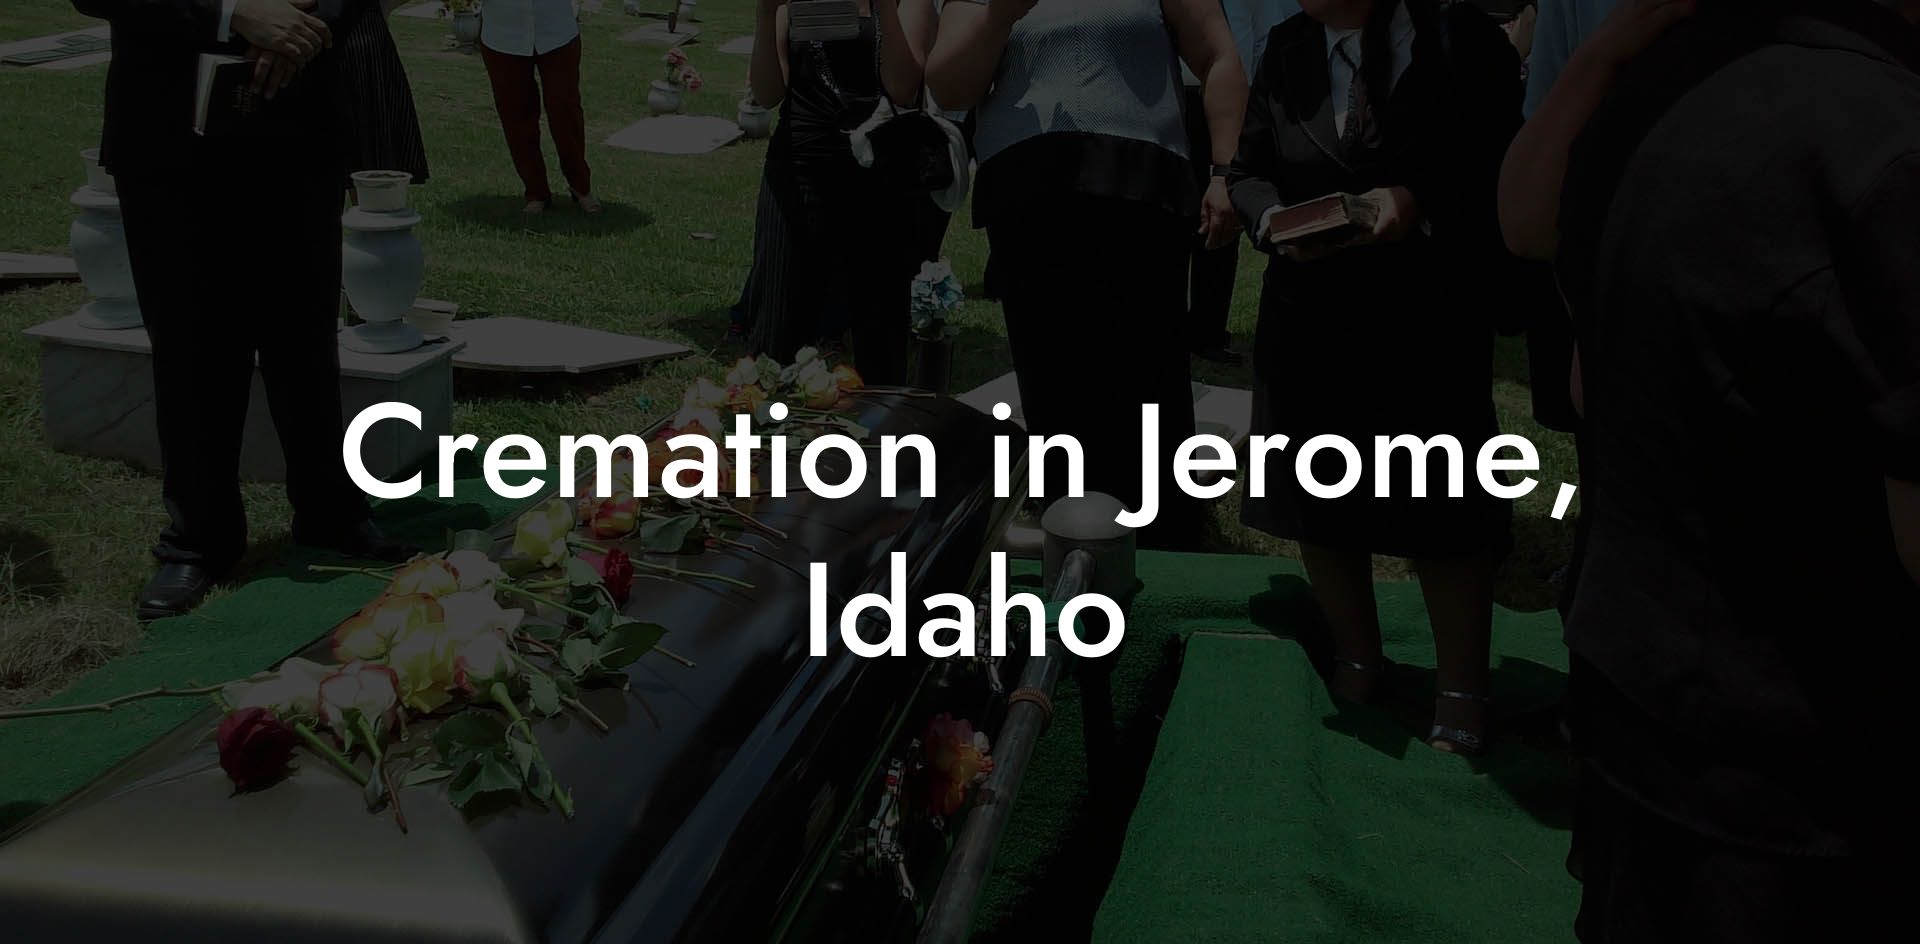 Cremation in Jerome, Idaho